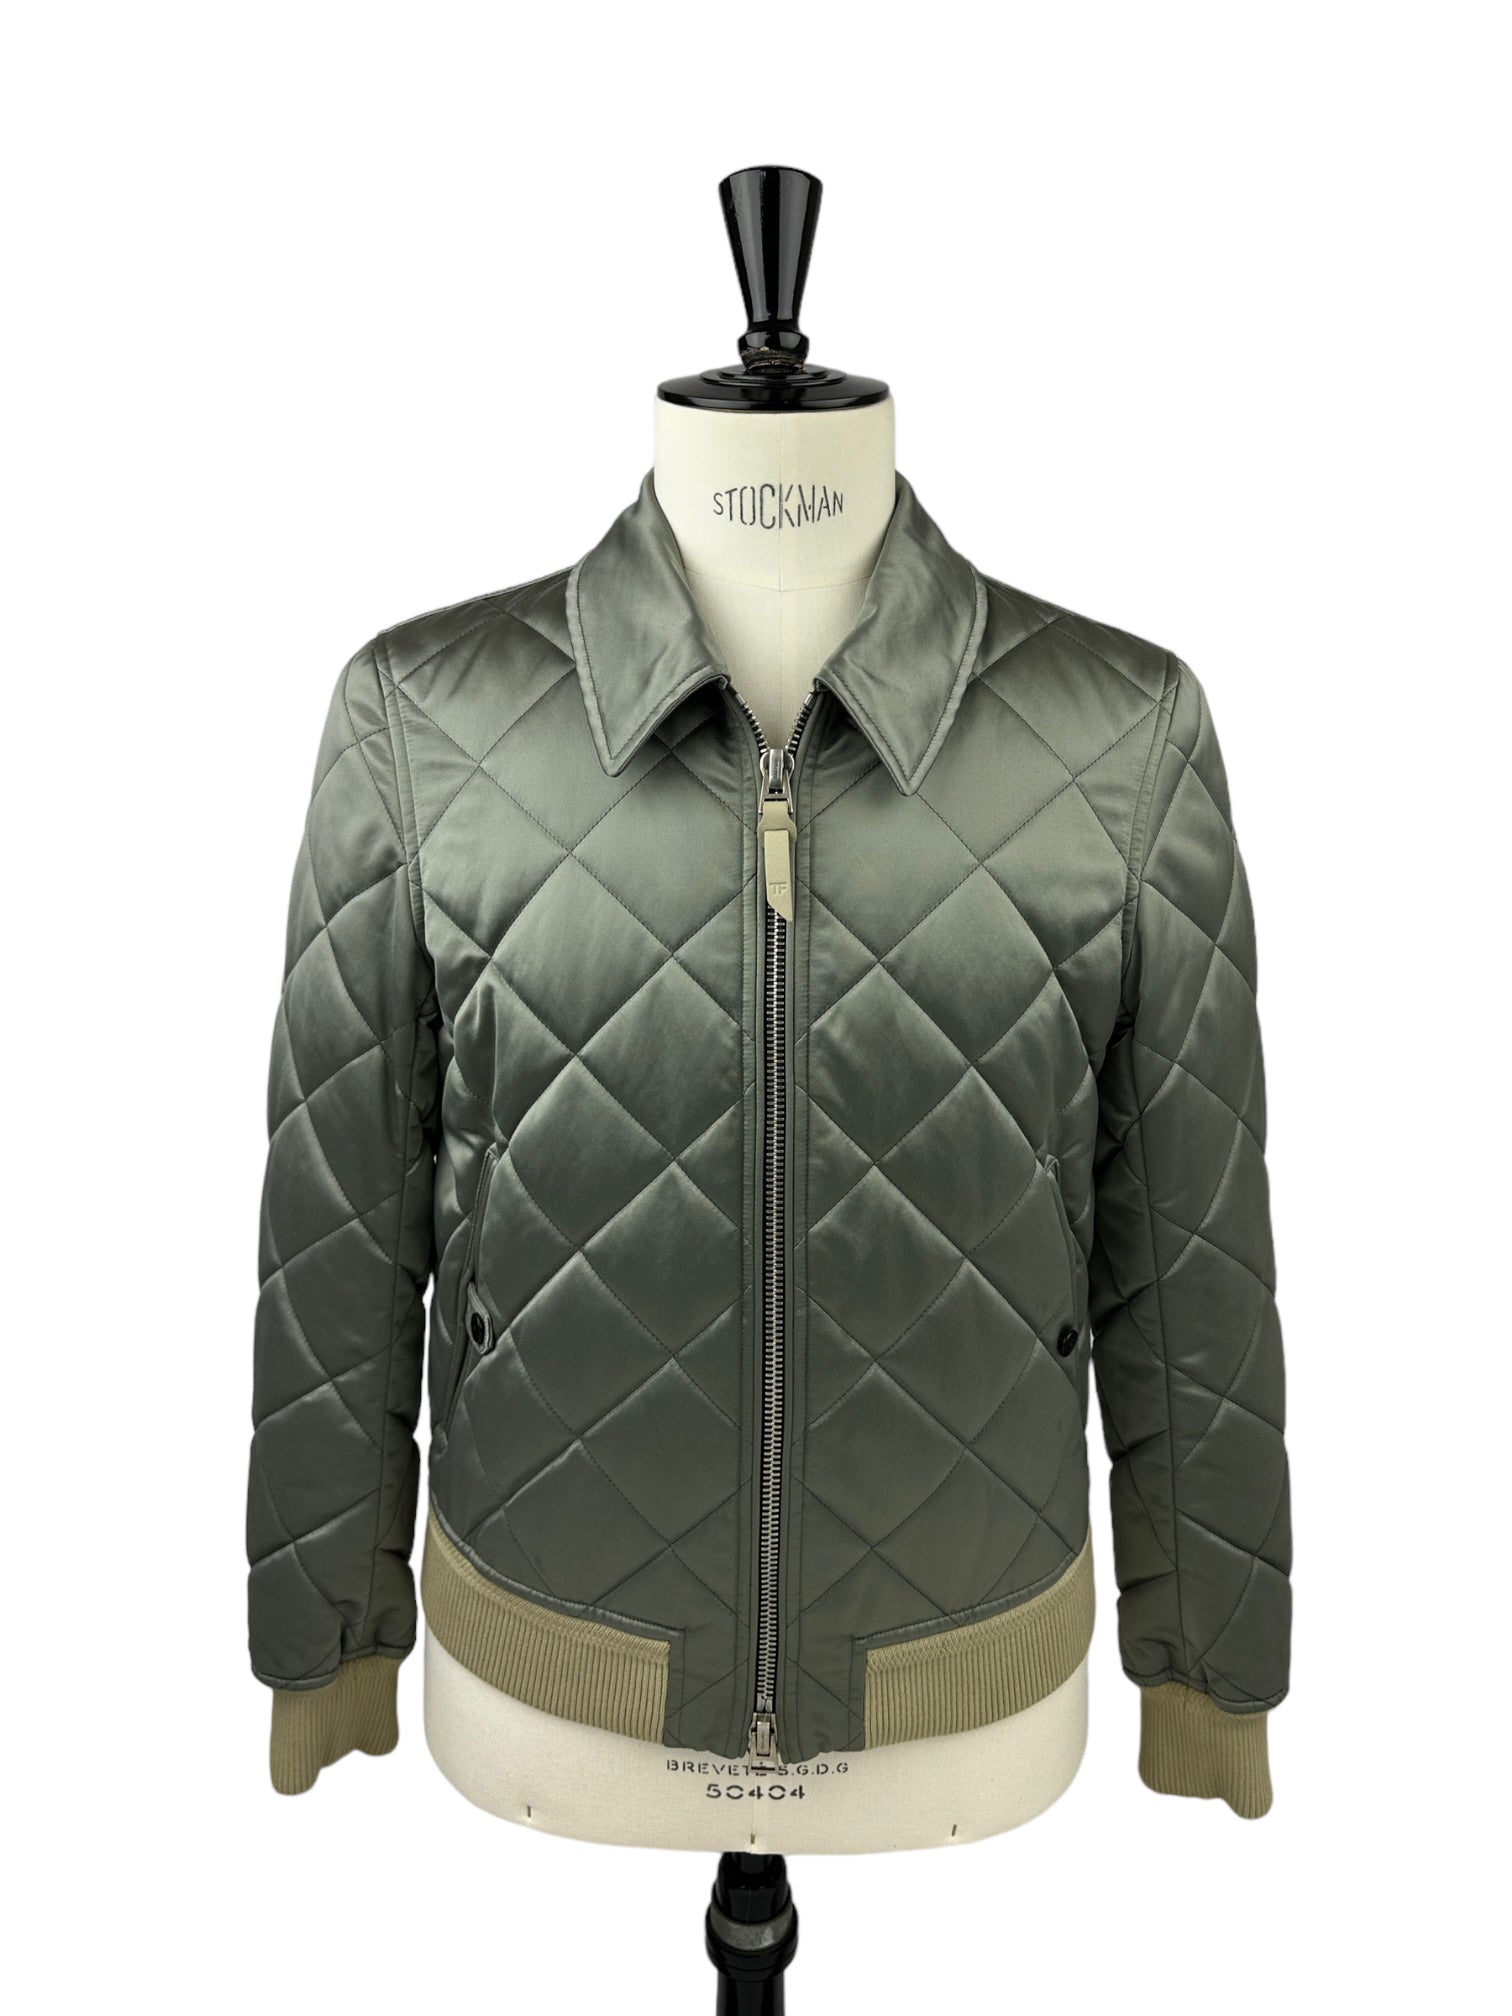 Tom Ford Pistache Diamond-Quilted Bomber Jacket